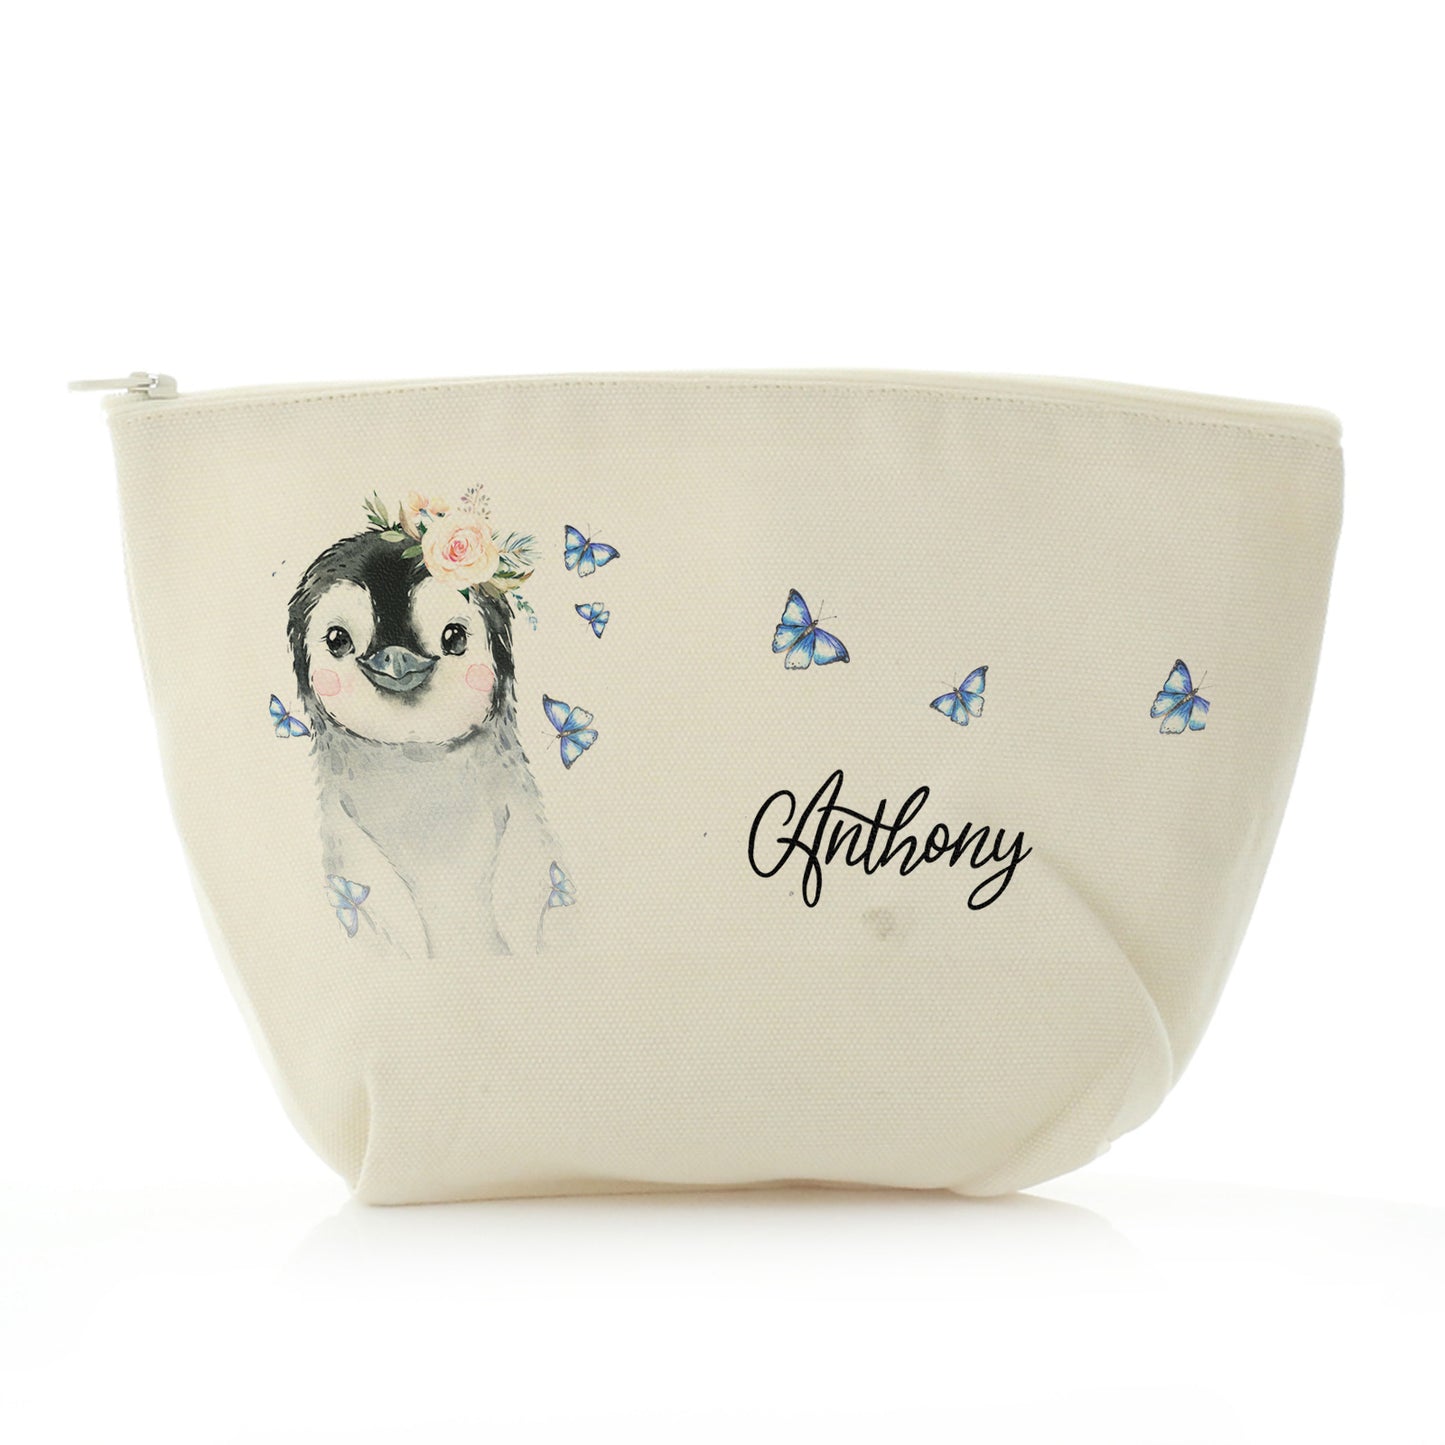 Personalised Canvas Zip Bag with Grey Penguin Blue Butterflies and Cute Text